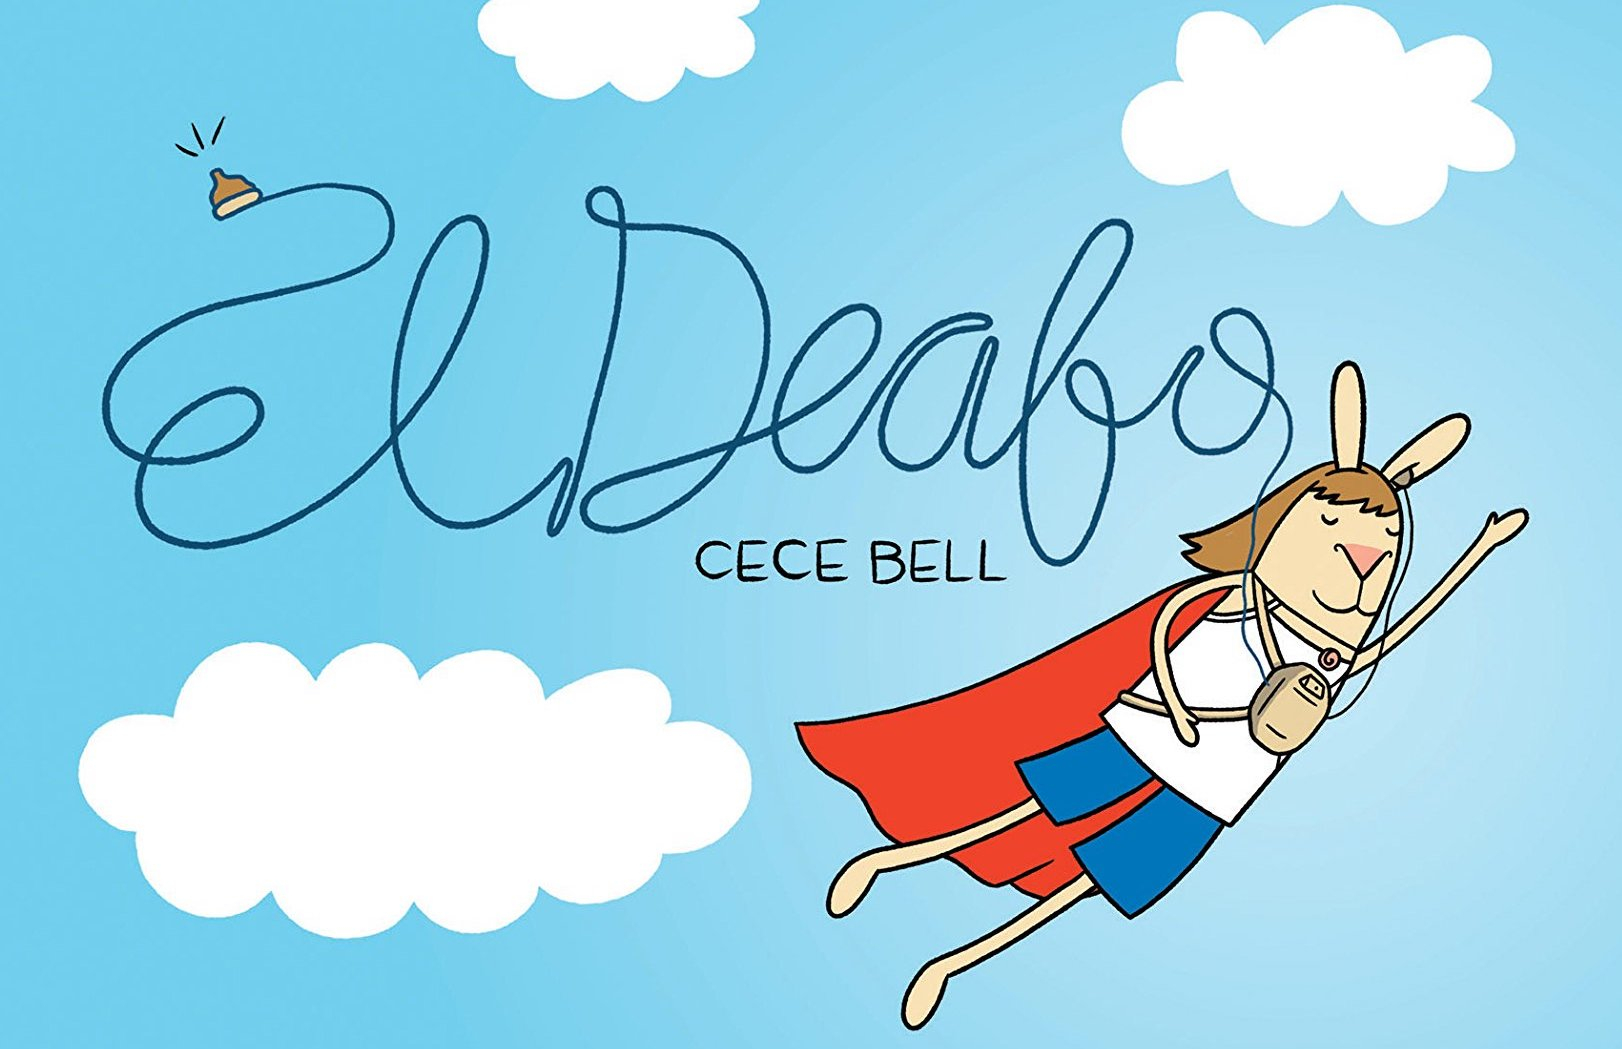 The cover image for El Deafo. The main character, Cece Bell, flies in the sky between clouds. She wears a cape, a white shirt, and blue shorts. Her eyes are closed and she smiles as she flies upwards. 